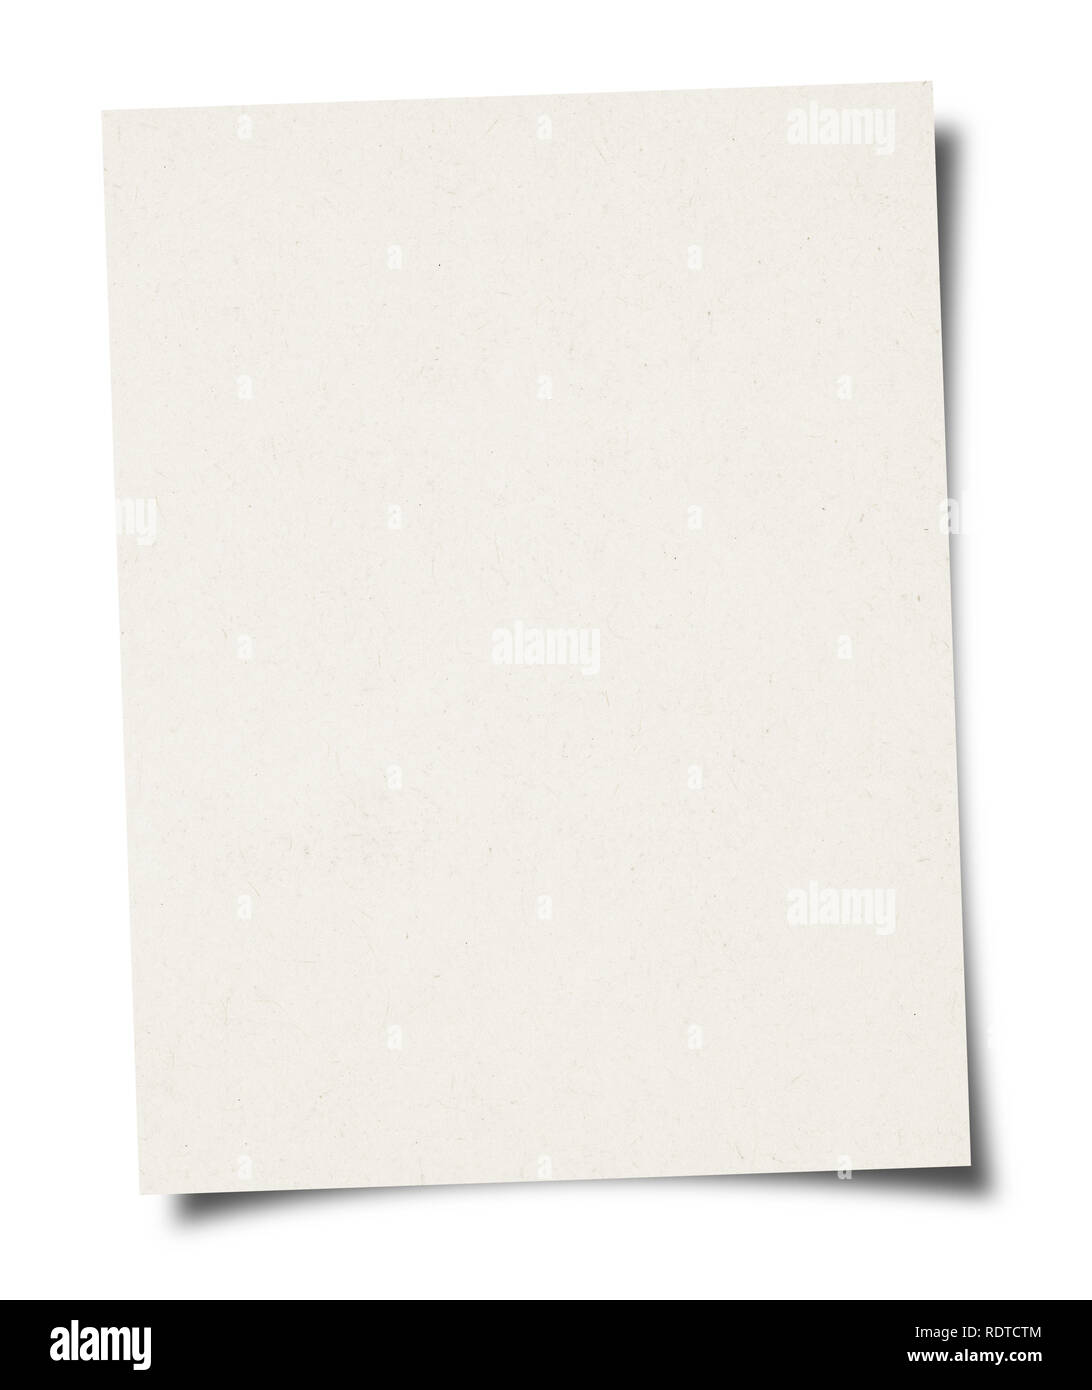 Blank sheet of paper background Stock Photo